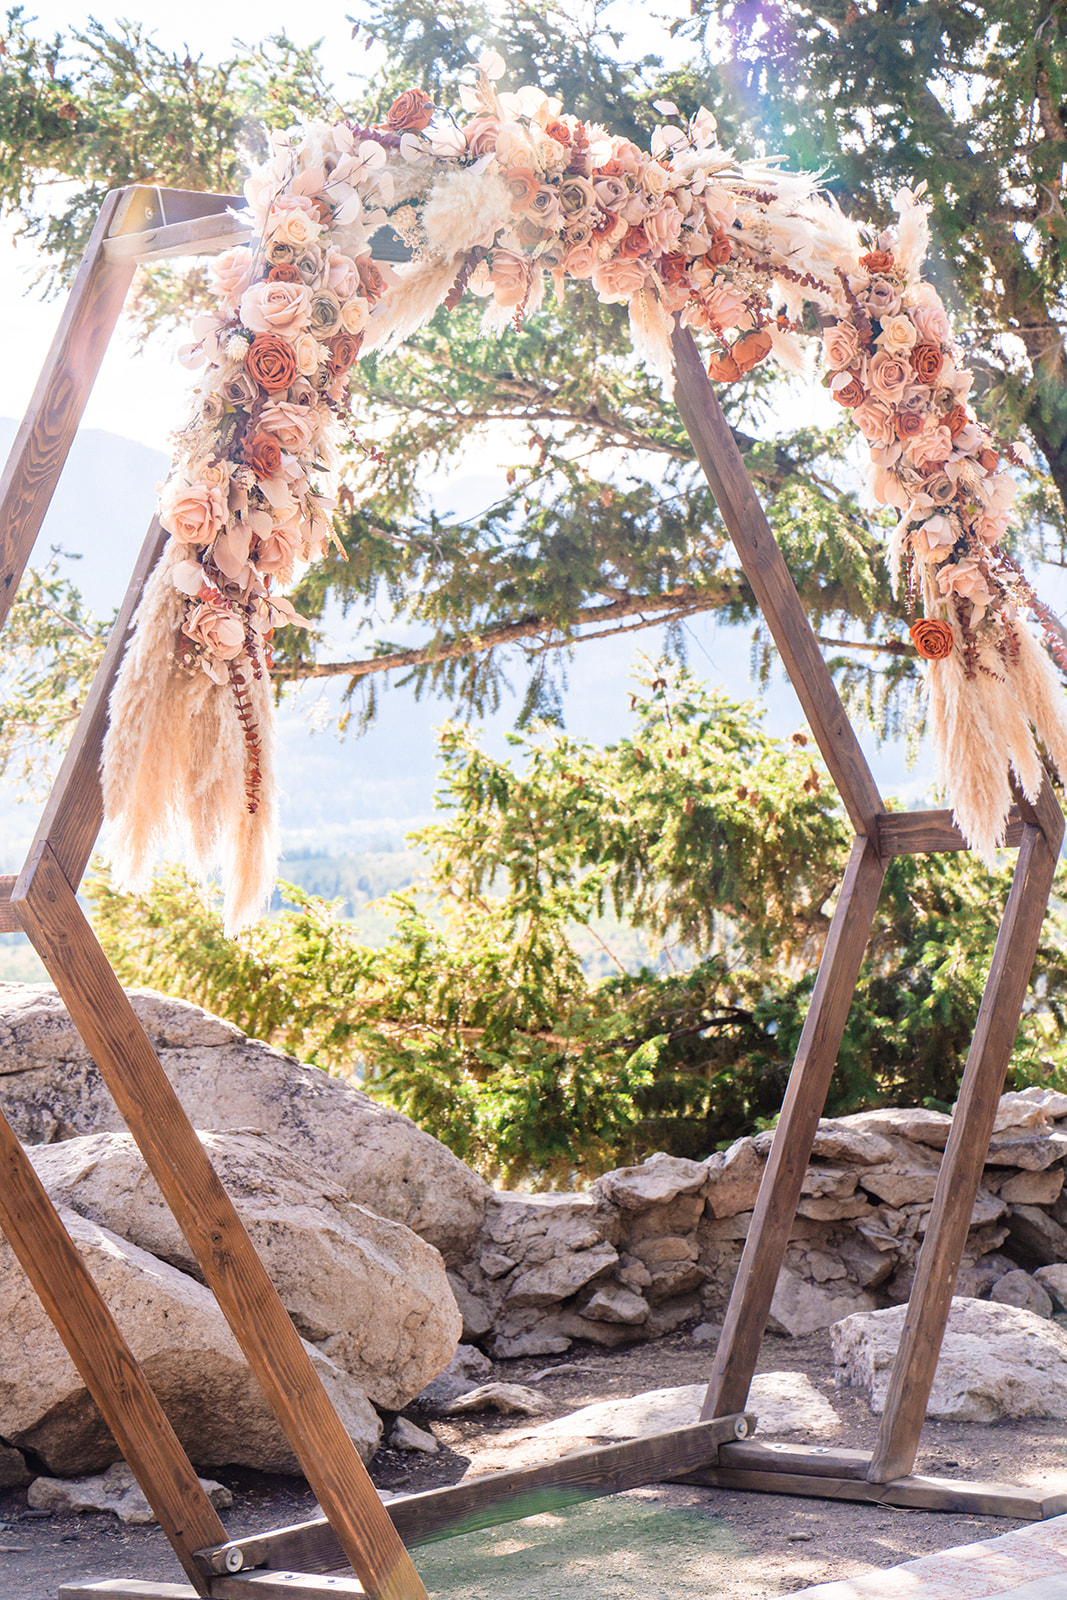 Wooden hexagon wedding arch pleasingly decorated with a plethora of boho styled florals set against a backdrop of mountains and trees during a Colorado intimate wedding at Sapphire Point in Breckenridge, Colorado. 